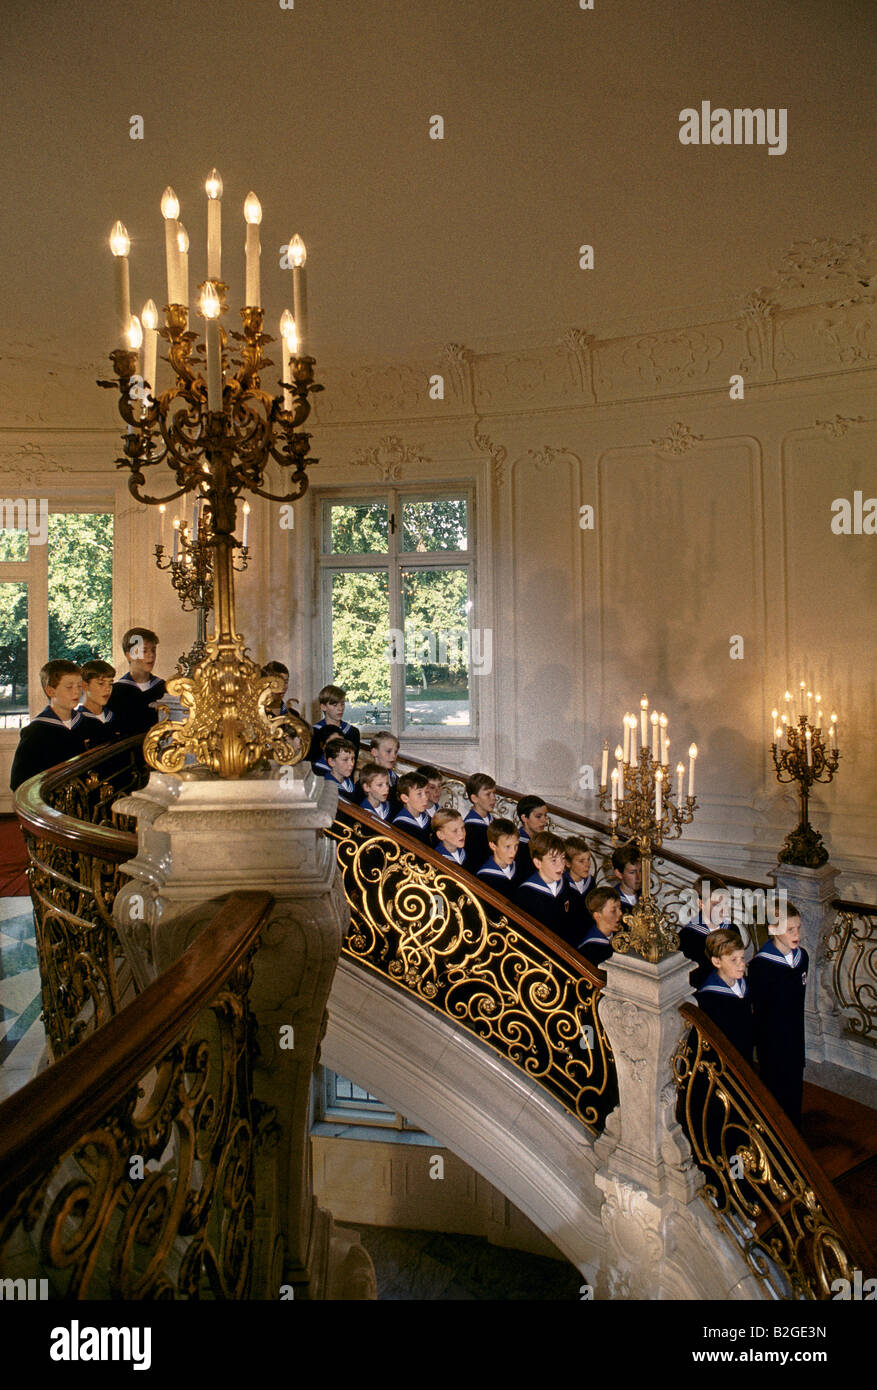 VIENNA BOYS CHOIR 1995 THE CHOIR HAS BEEN SINGING IN THE CHAPEL ROYAL OF THE IMPERIAL PALACE FOR 500 YEARS Stock Photo